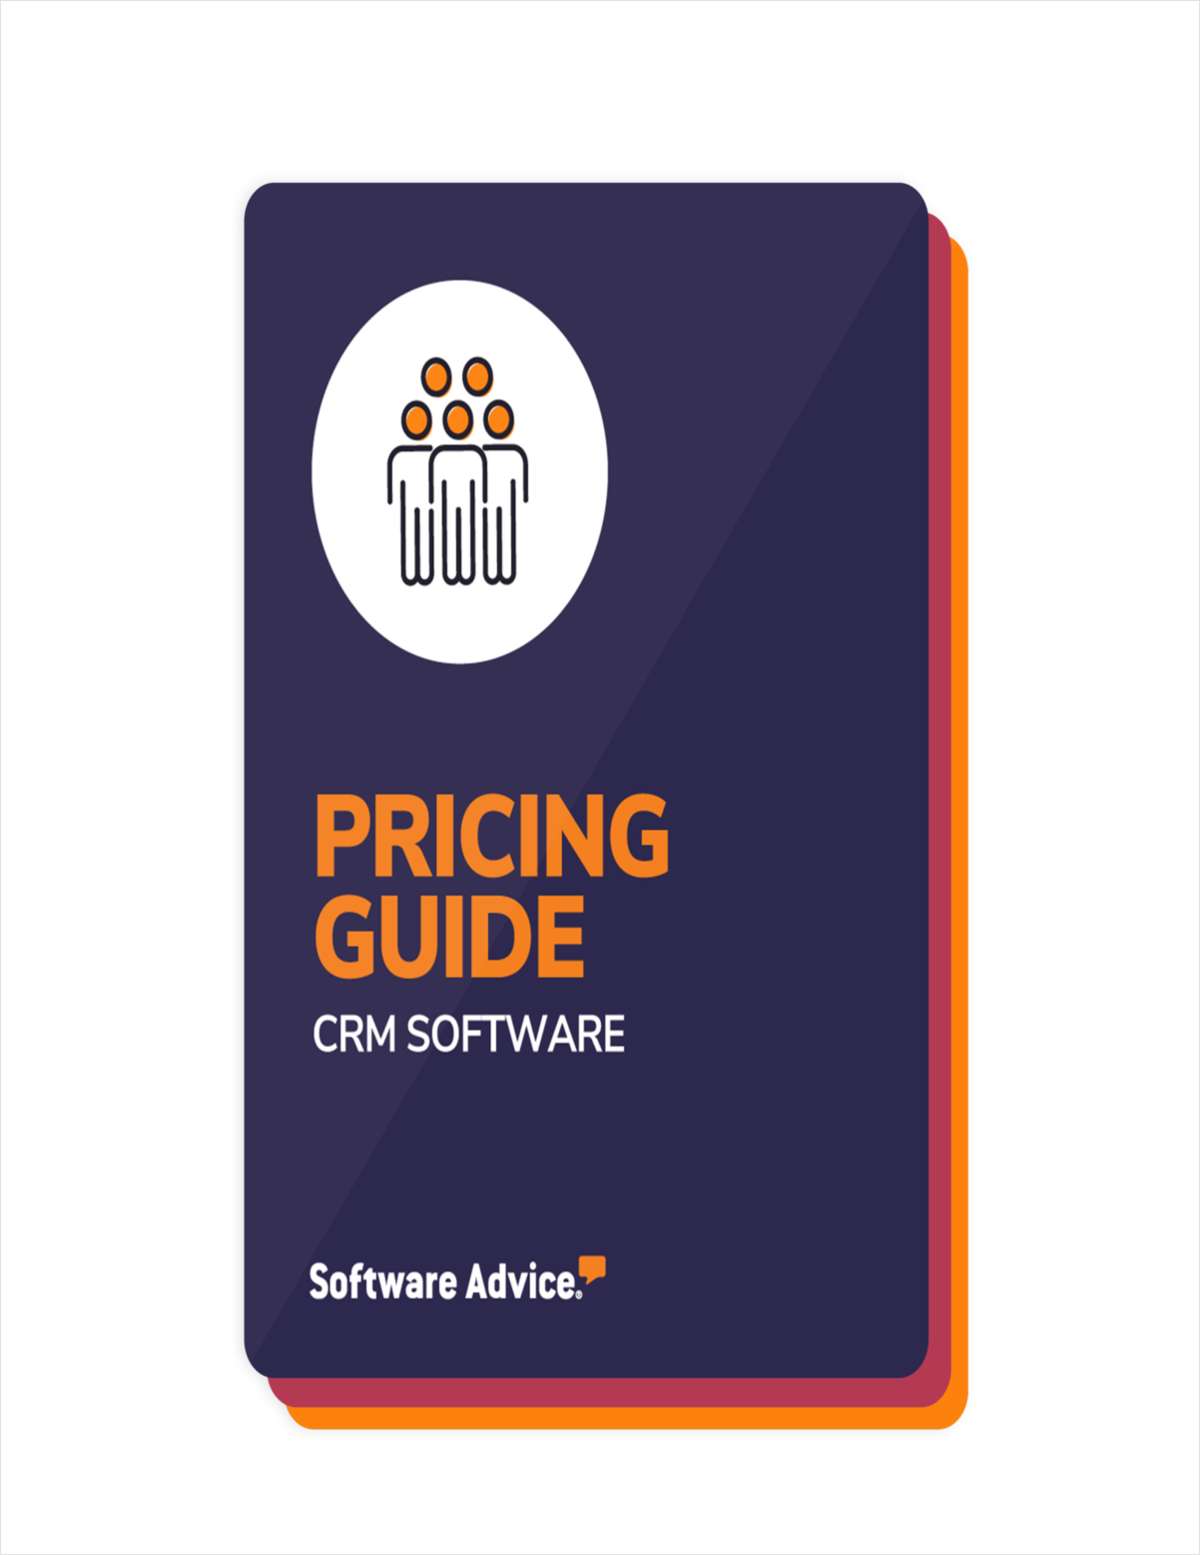 Don't Overpay: What to Know About CRM Software Prices in 2022